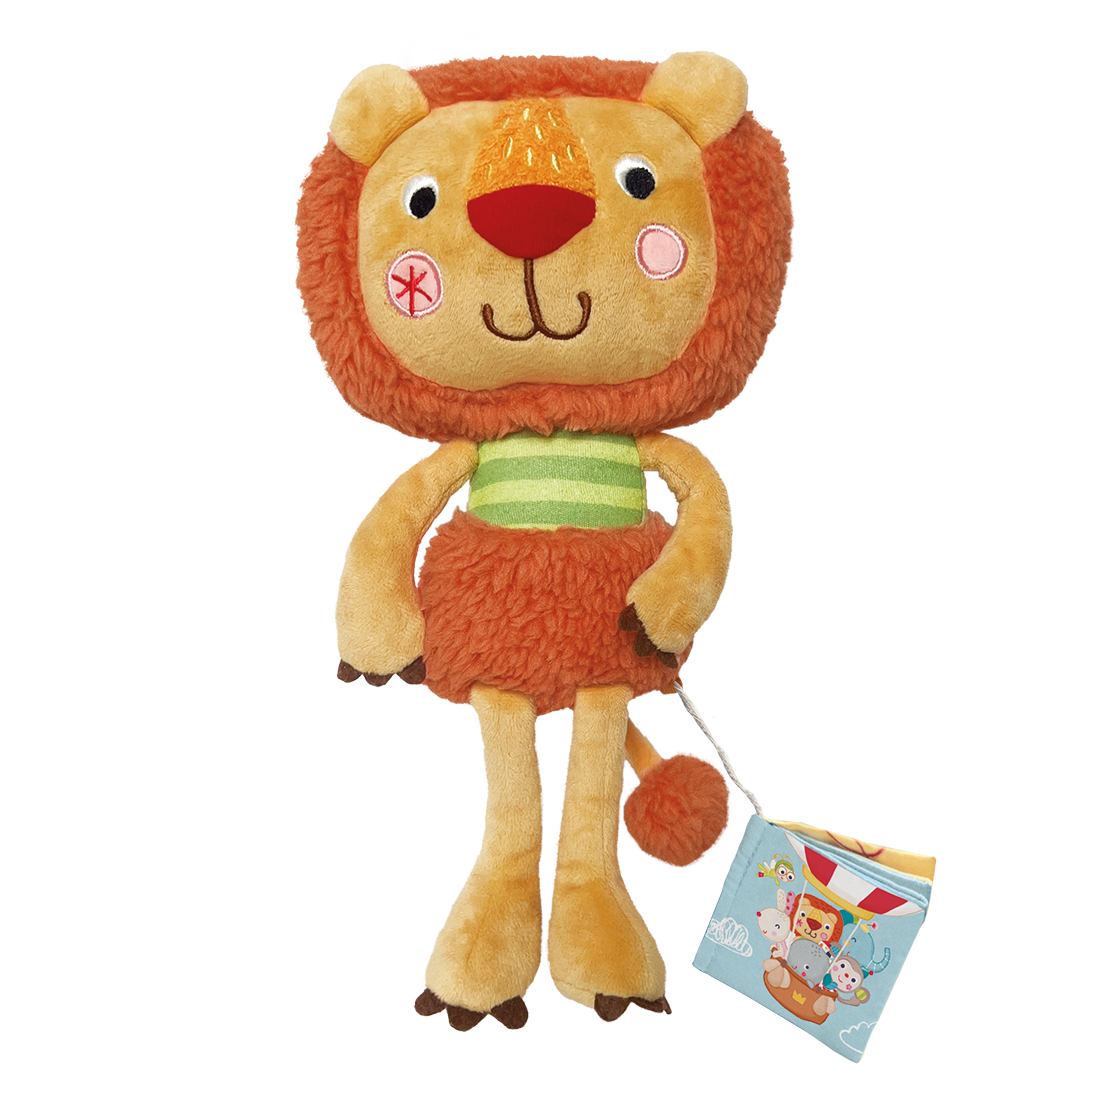 Best Friend Bababoo Plush Toy product image